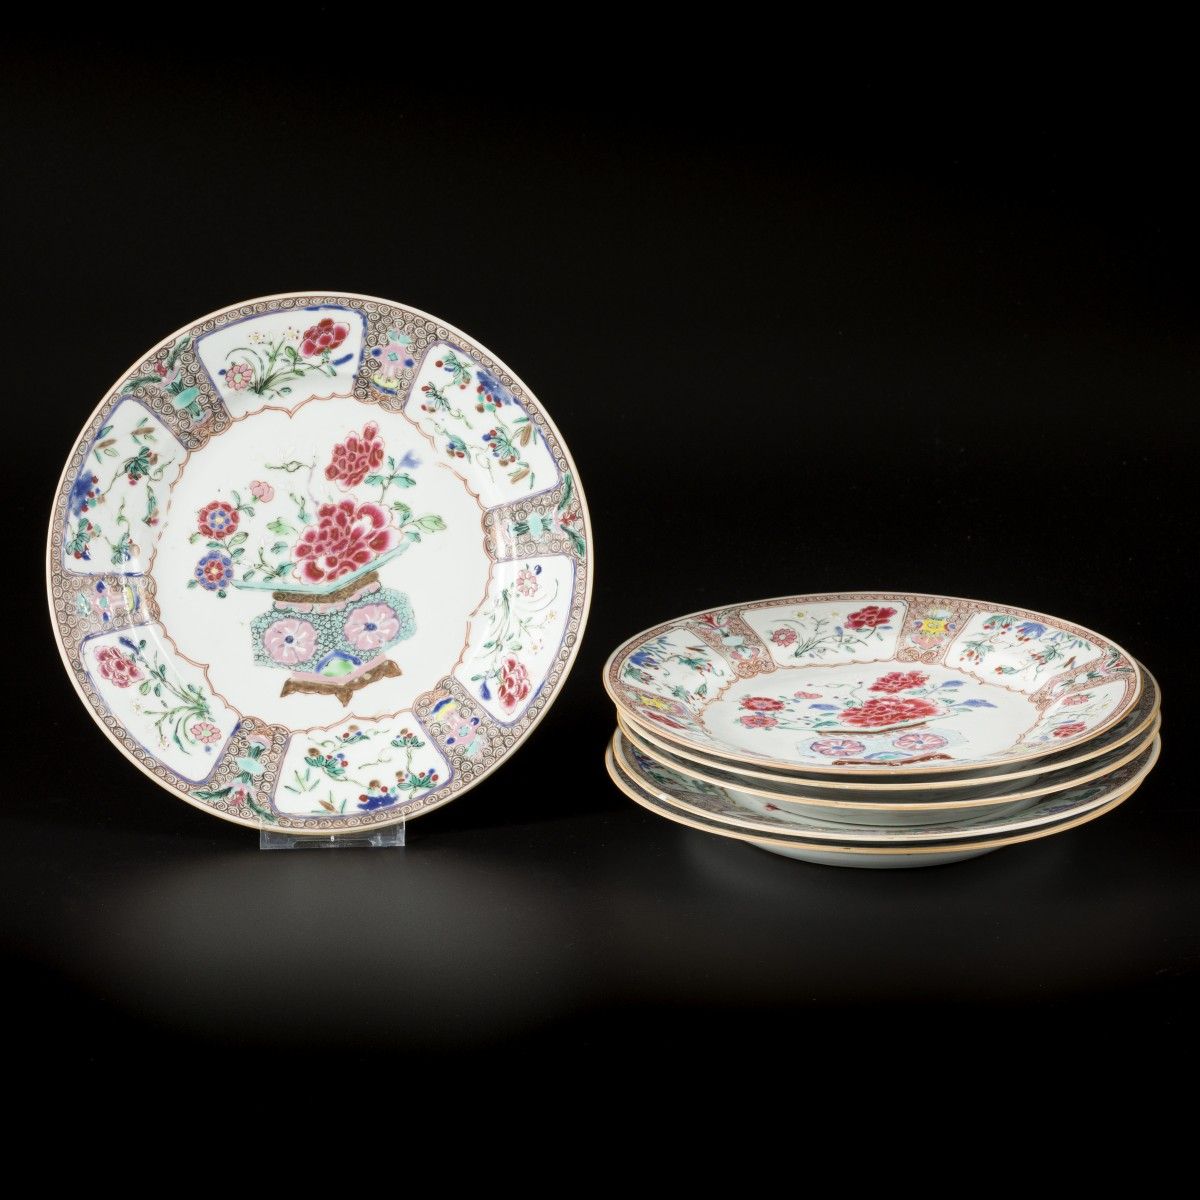 A set of (6) porcelain plates with floral decoration, China, 18th century. Diamè&hellip;